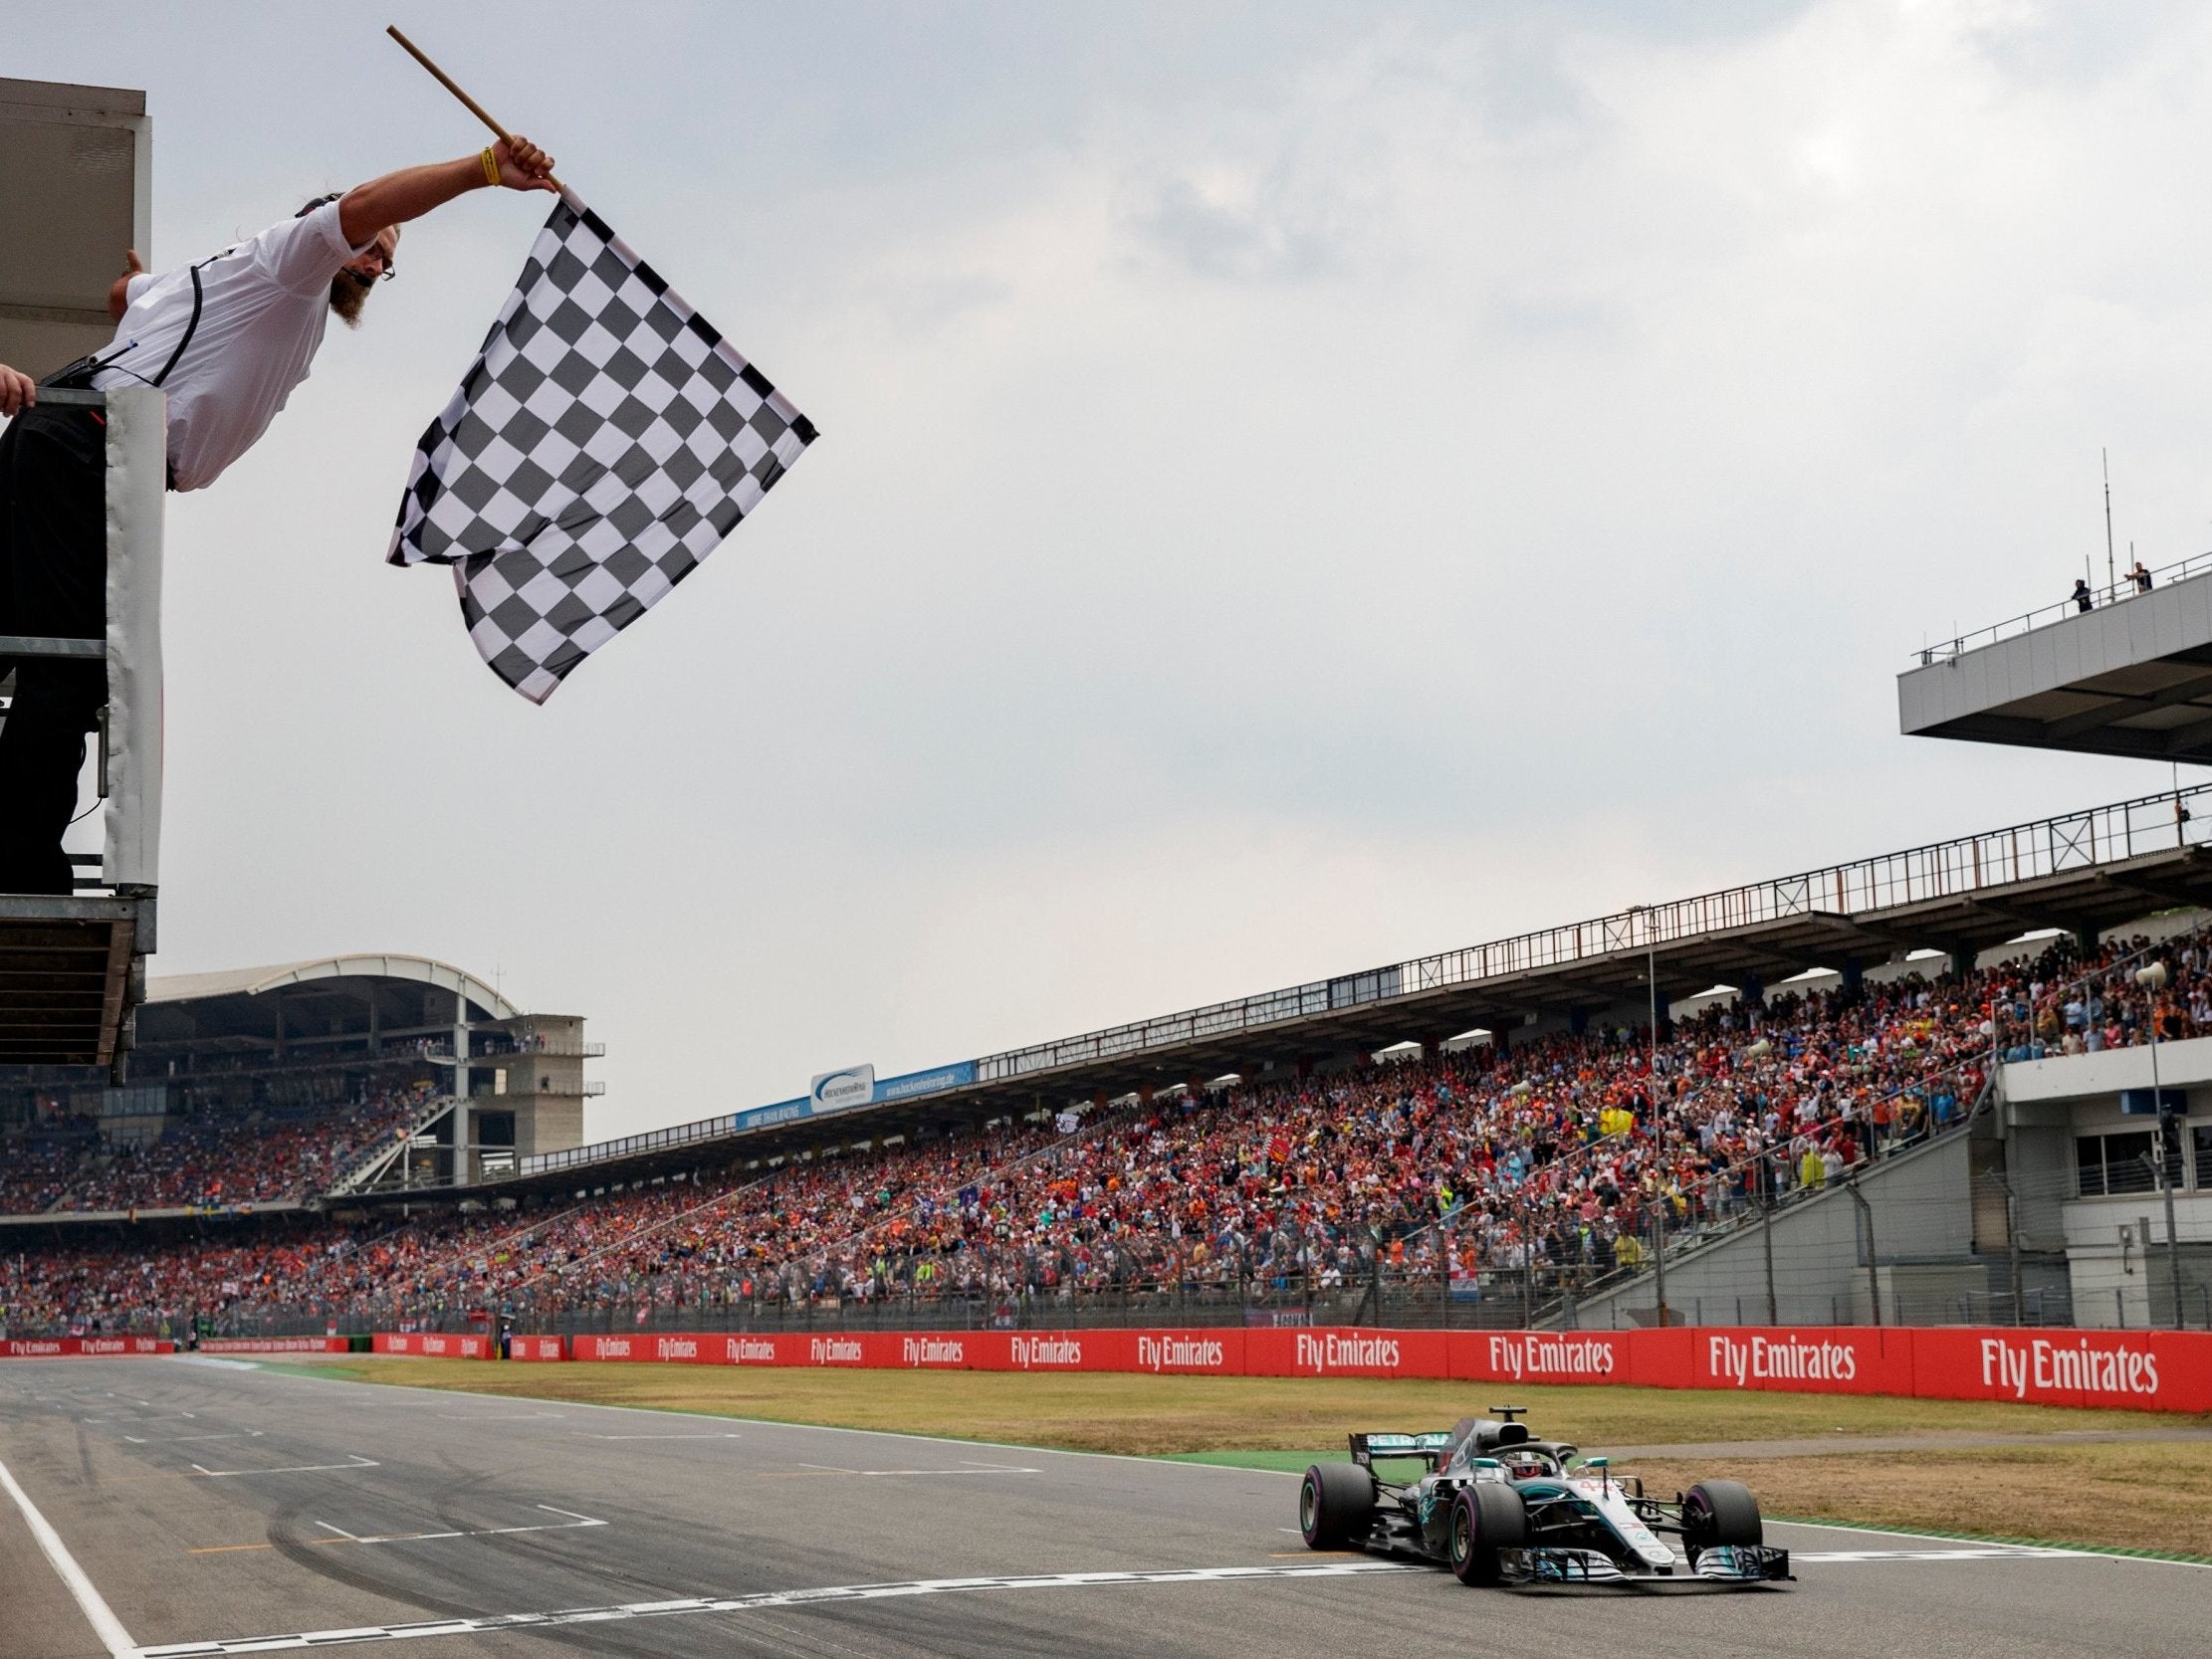 Hamilton pulled off a stunning fightback to claim victory in Germany